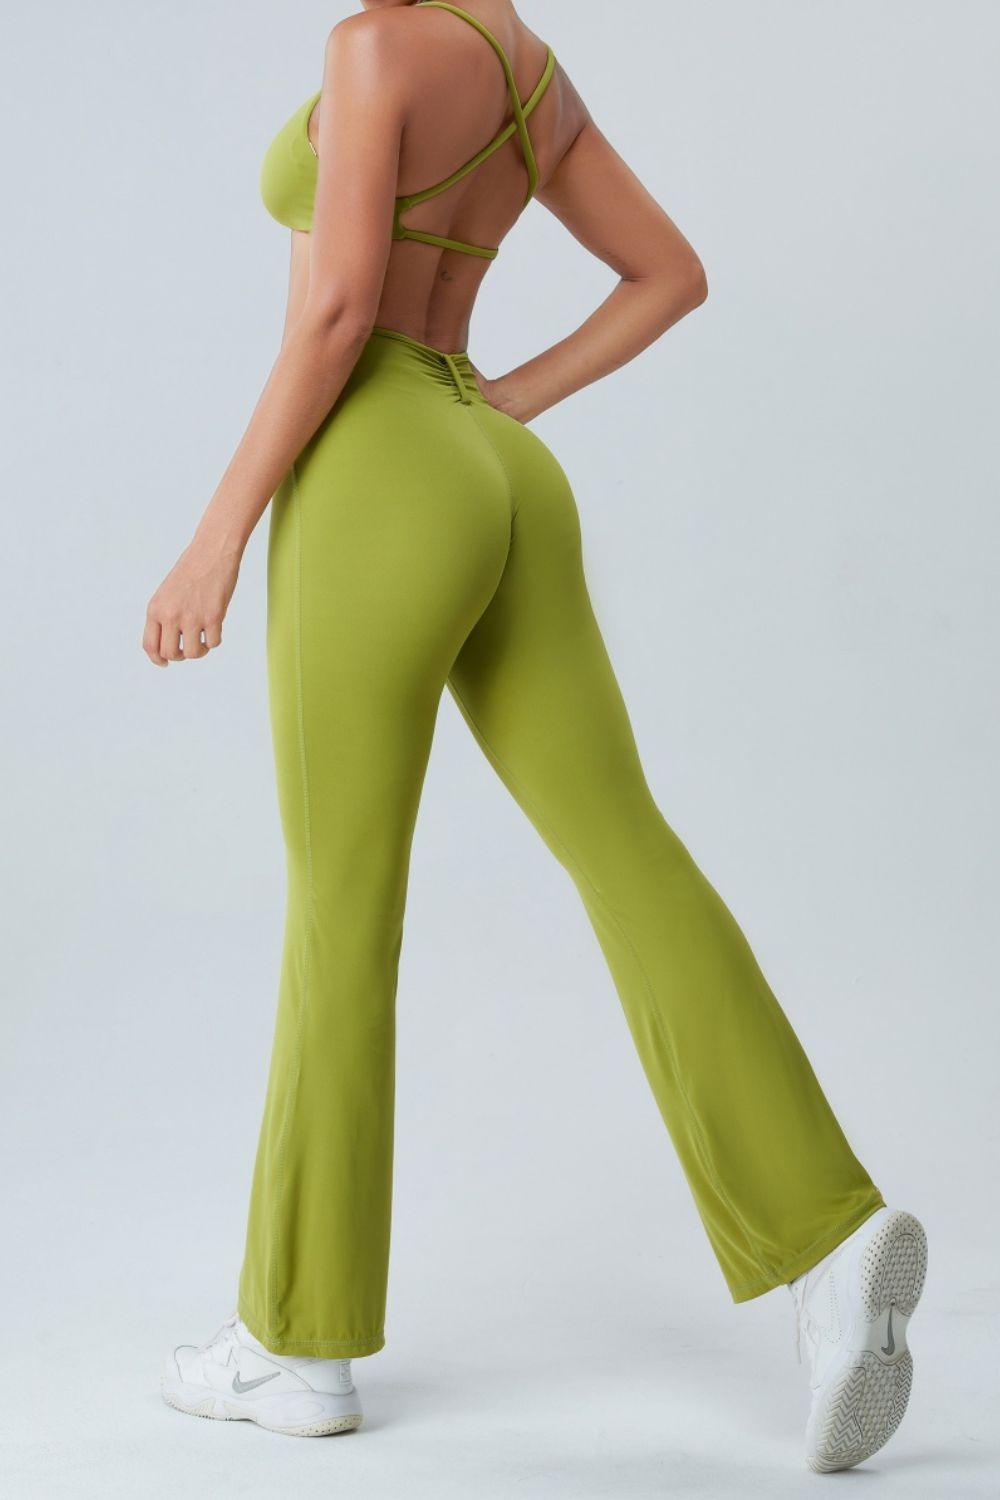 a woman in green pants and a bra top